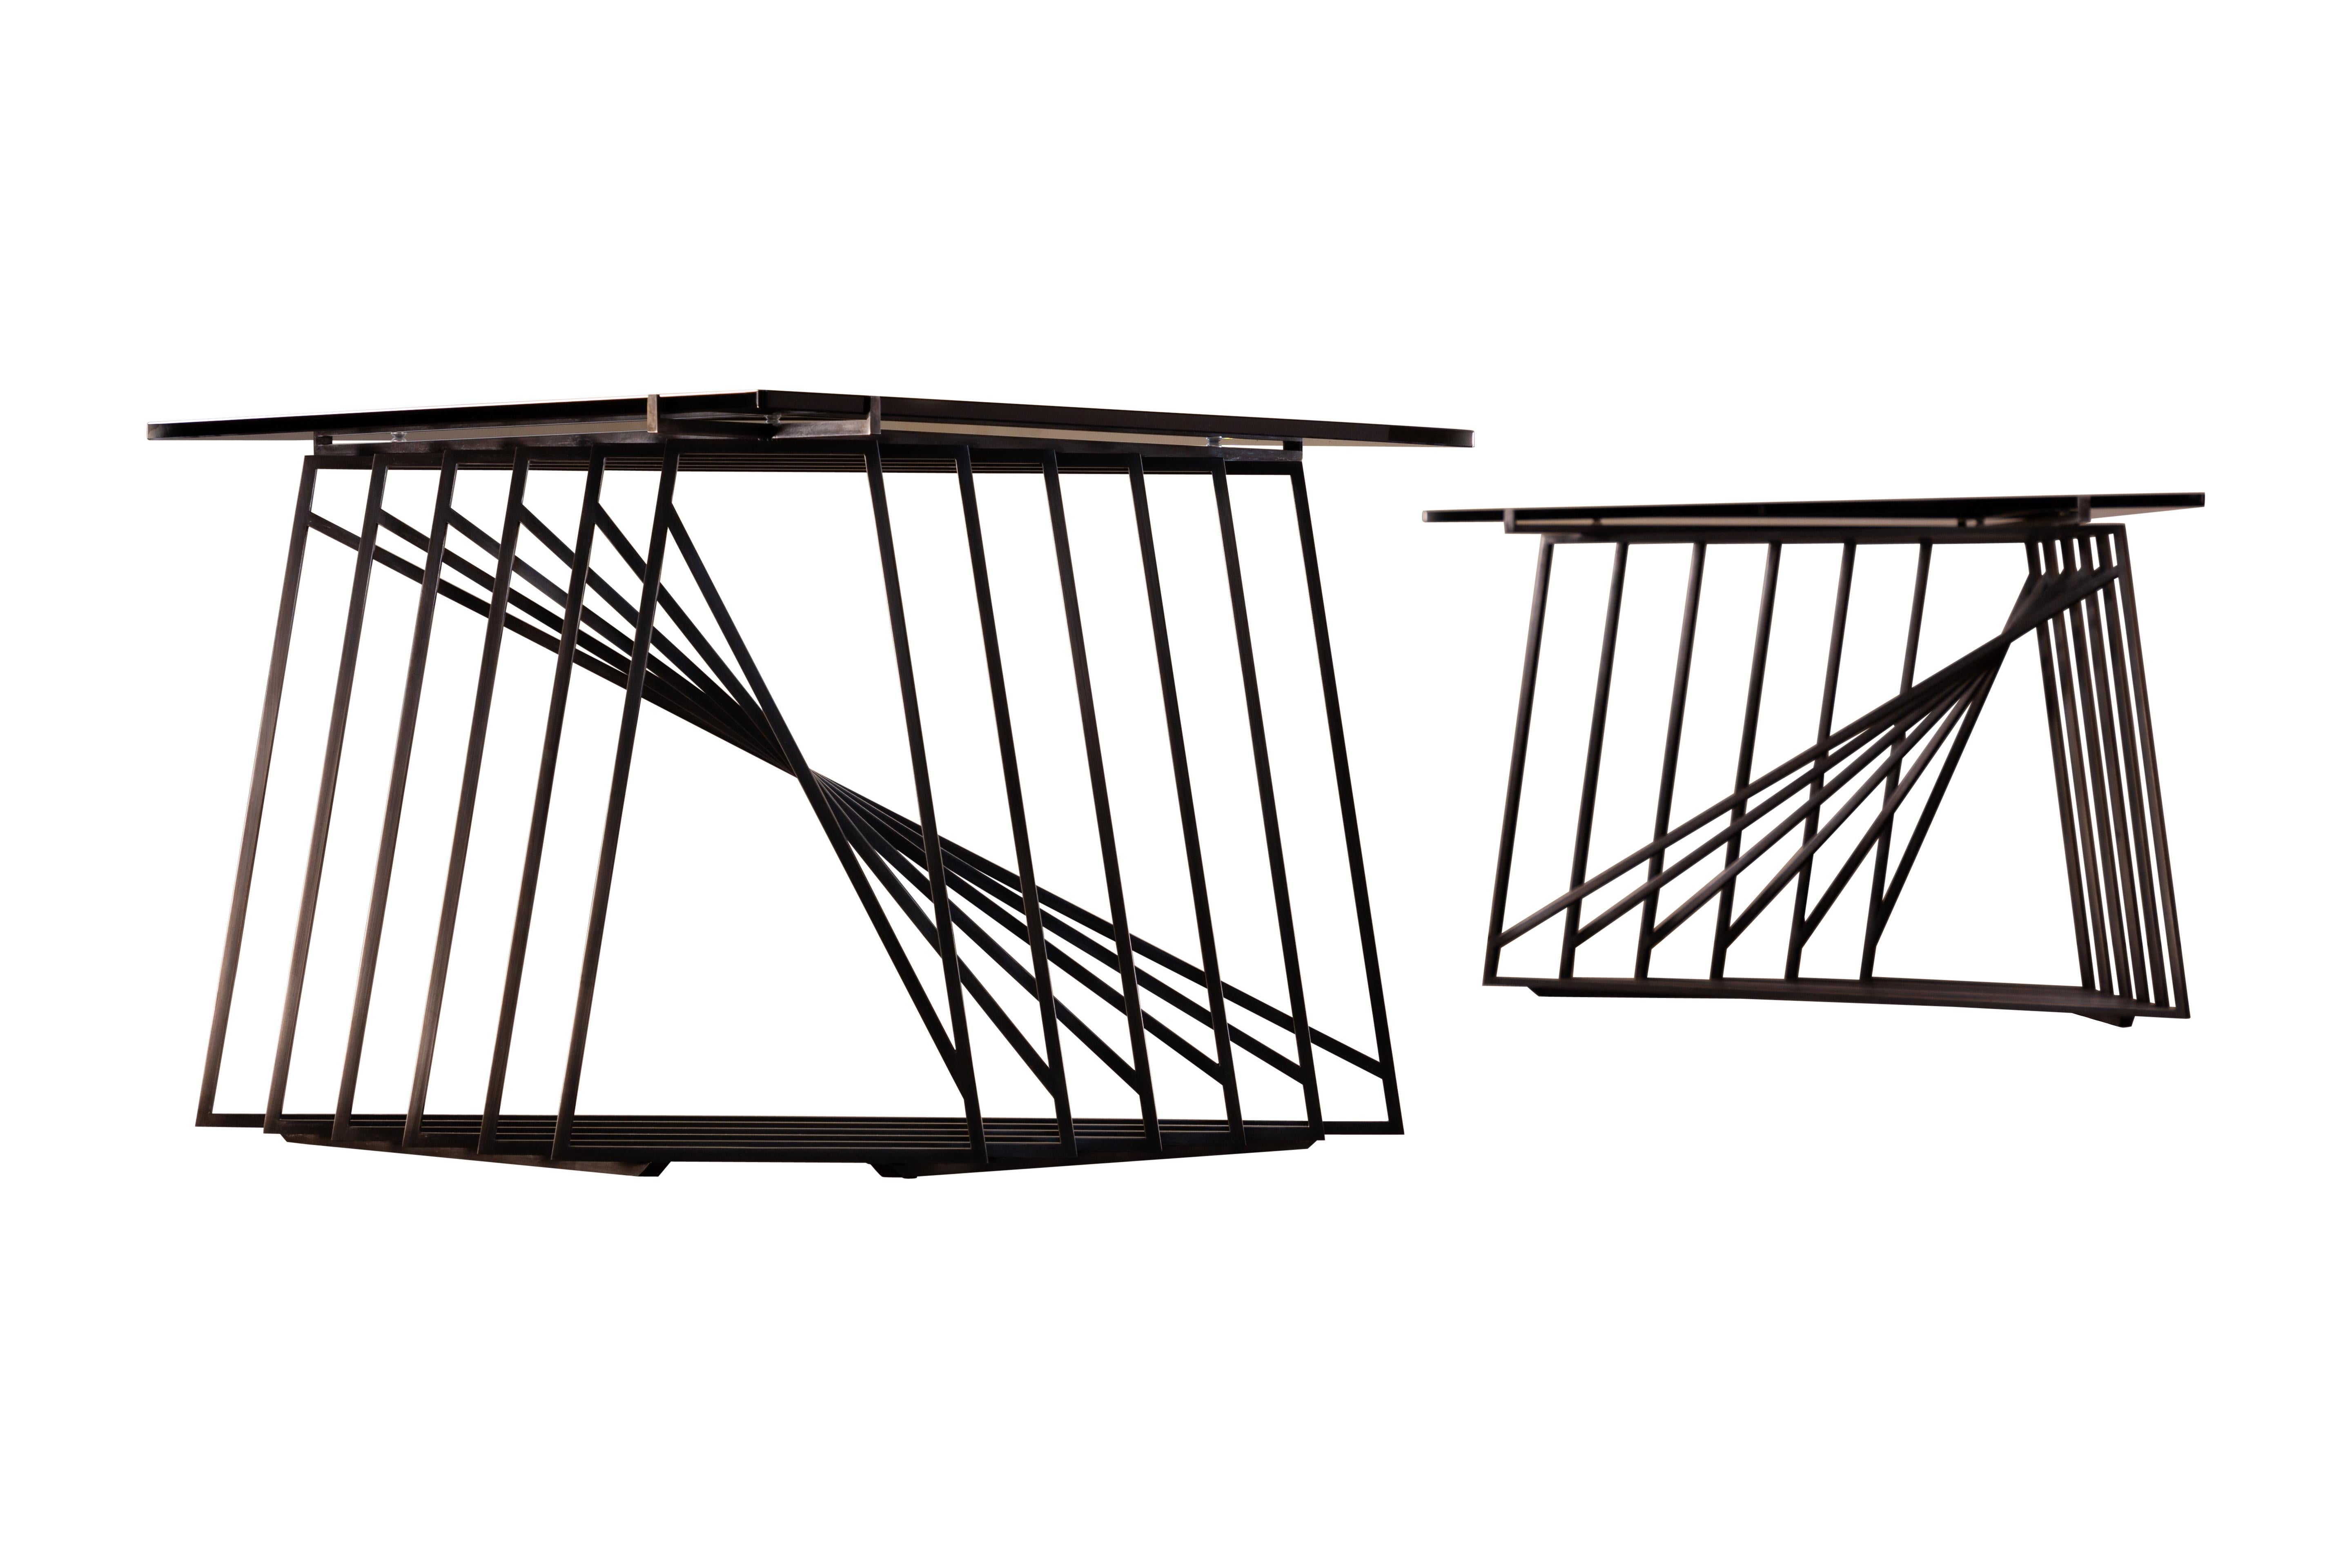 Pair of Modular Side Tables in Blackened Steel and Smoked Glass by Force/Collide